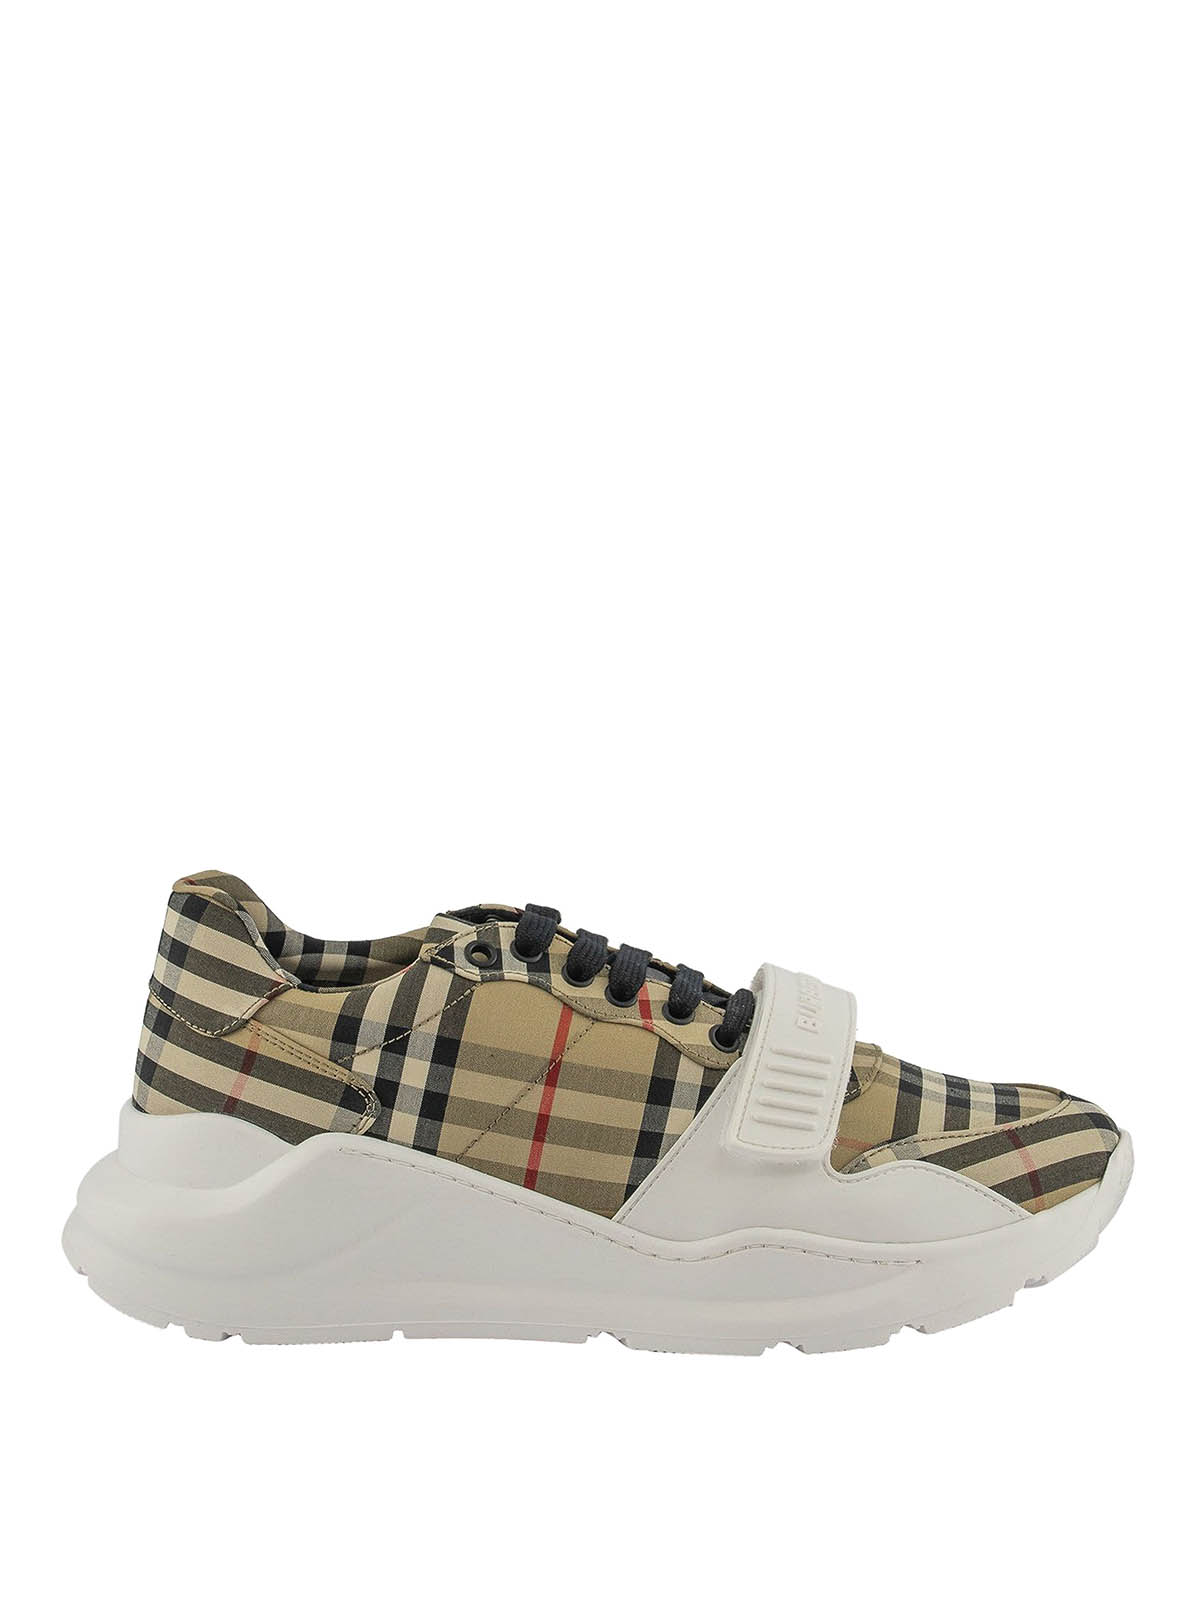 Burberry - Cotton Vintage Check sneakers - trainers - 8020282 | iKRIX.com